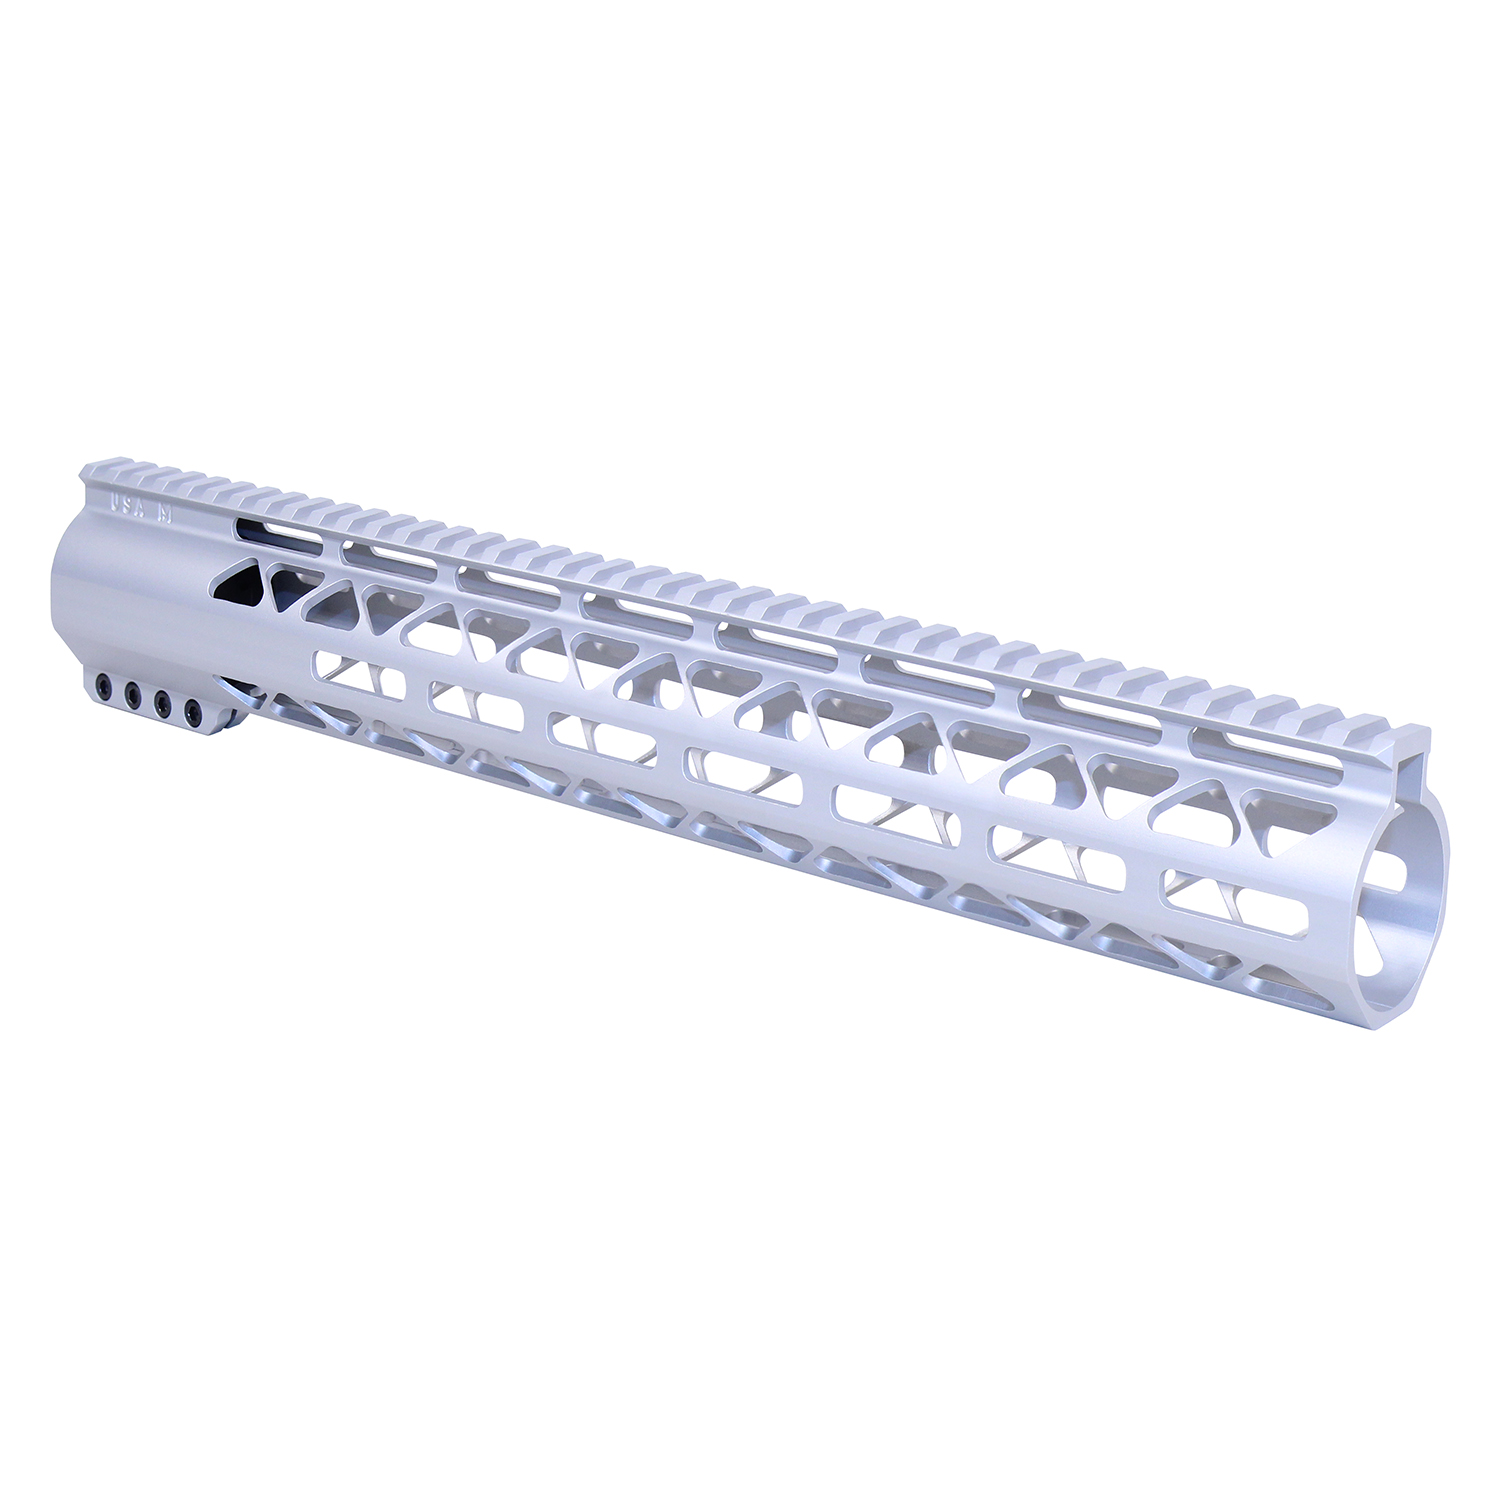 15" AIR-LOK Series M-LOK Compression Free Floating Handguard With Monolithic Top Rail (.308 Cal) (Anodized Clear)